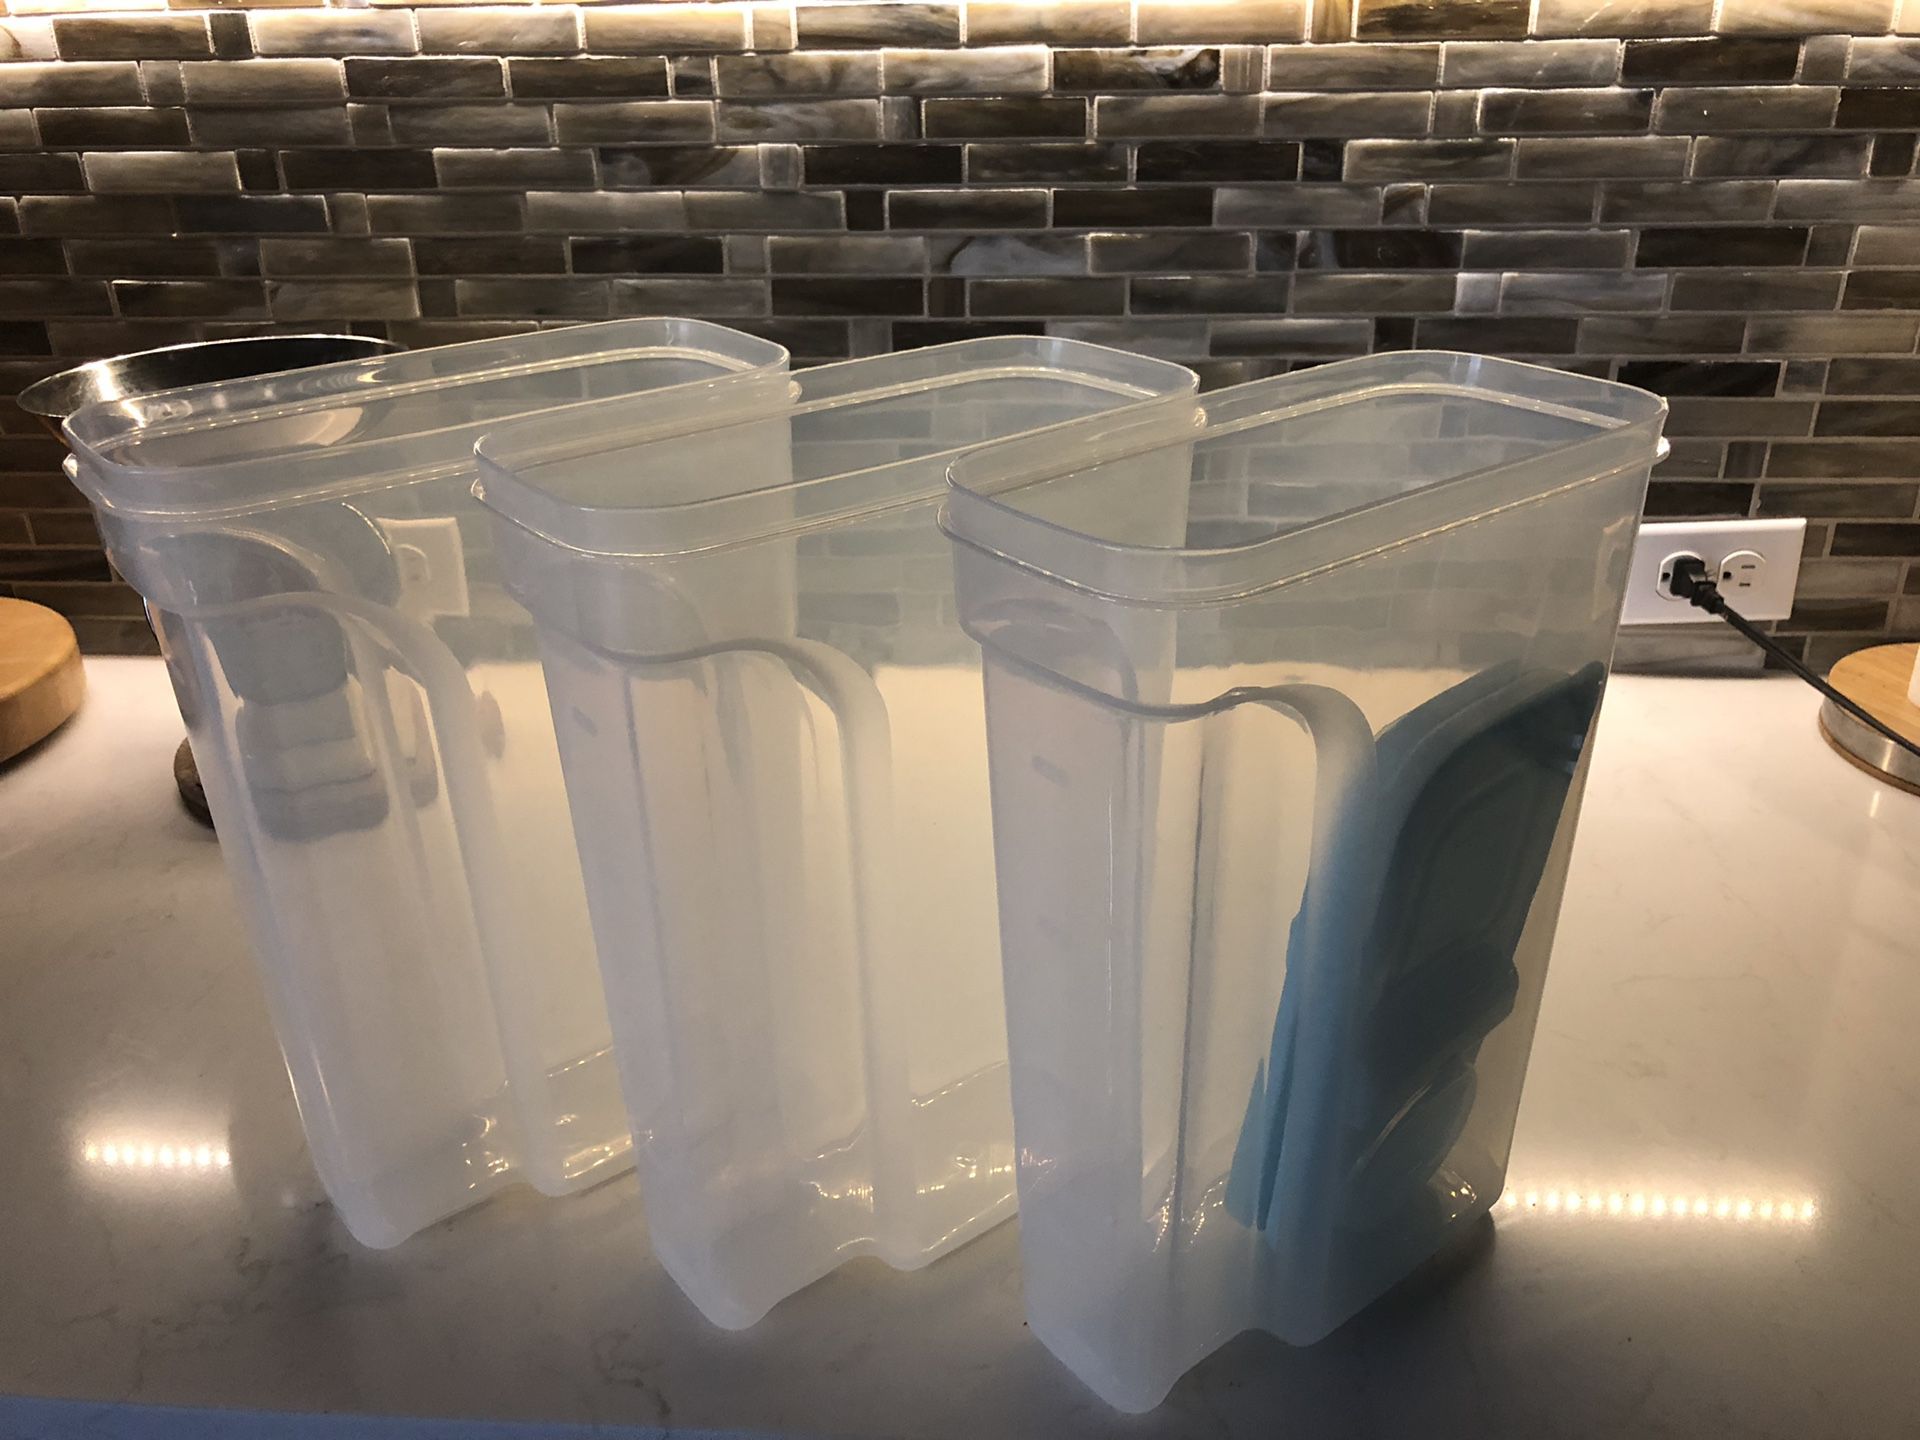 Kitchen dry storage containers, hold 20 cups